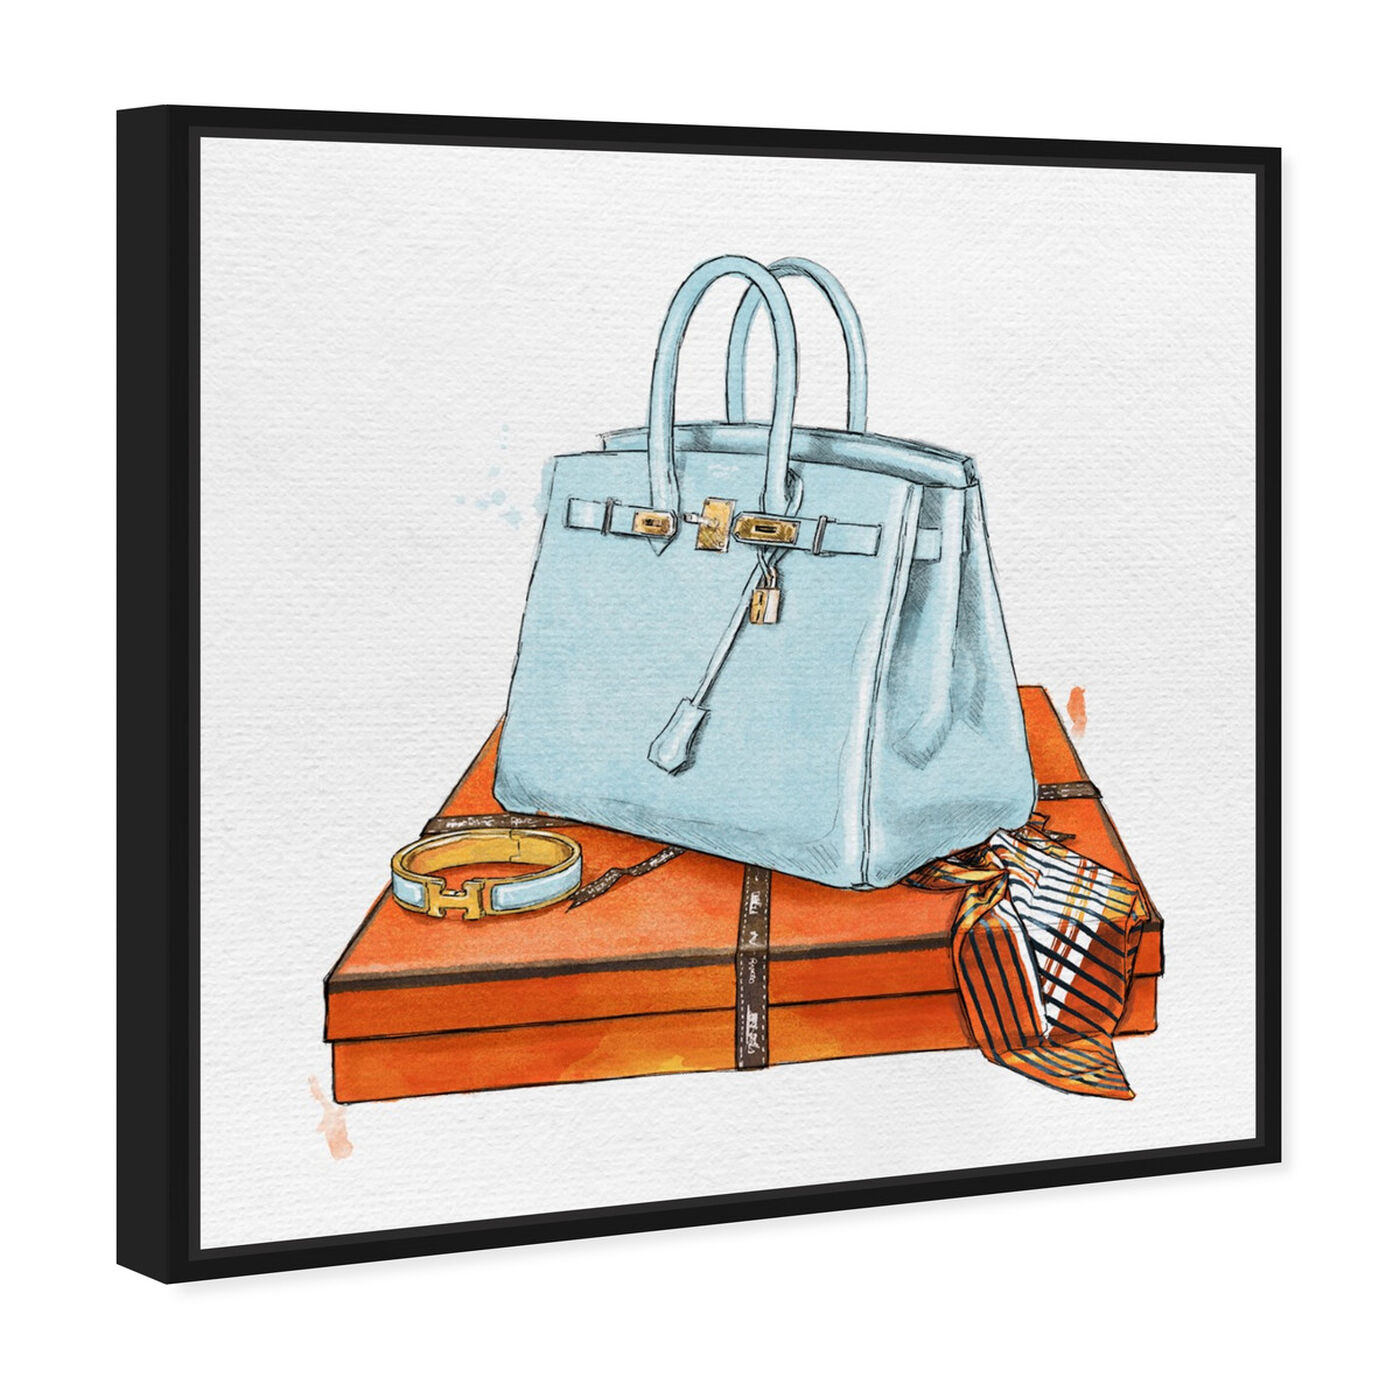 Oliver Gal 'Royal Bag and Luggage Gold diecut' Fashion and Glam